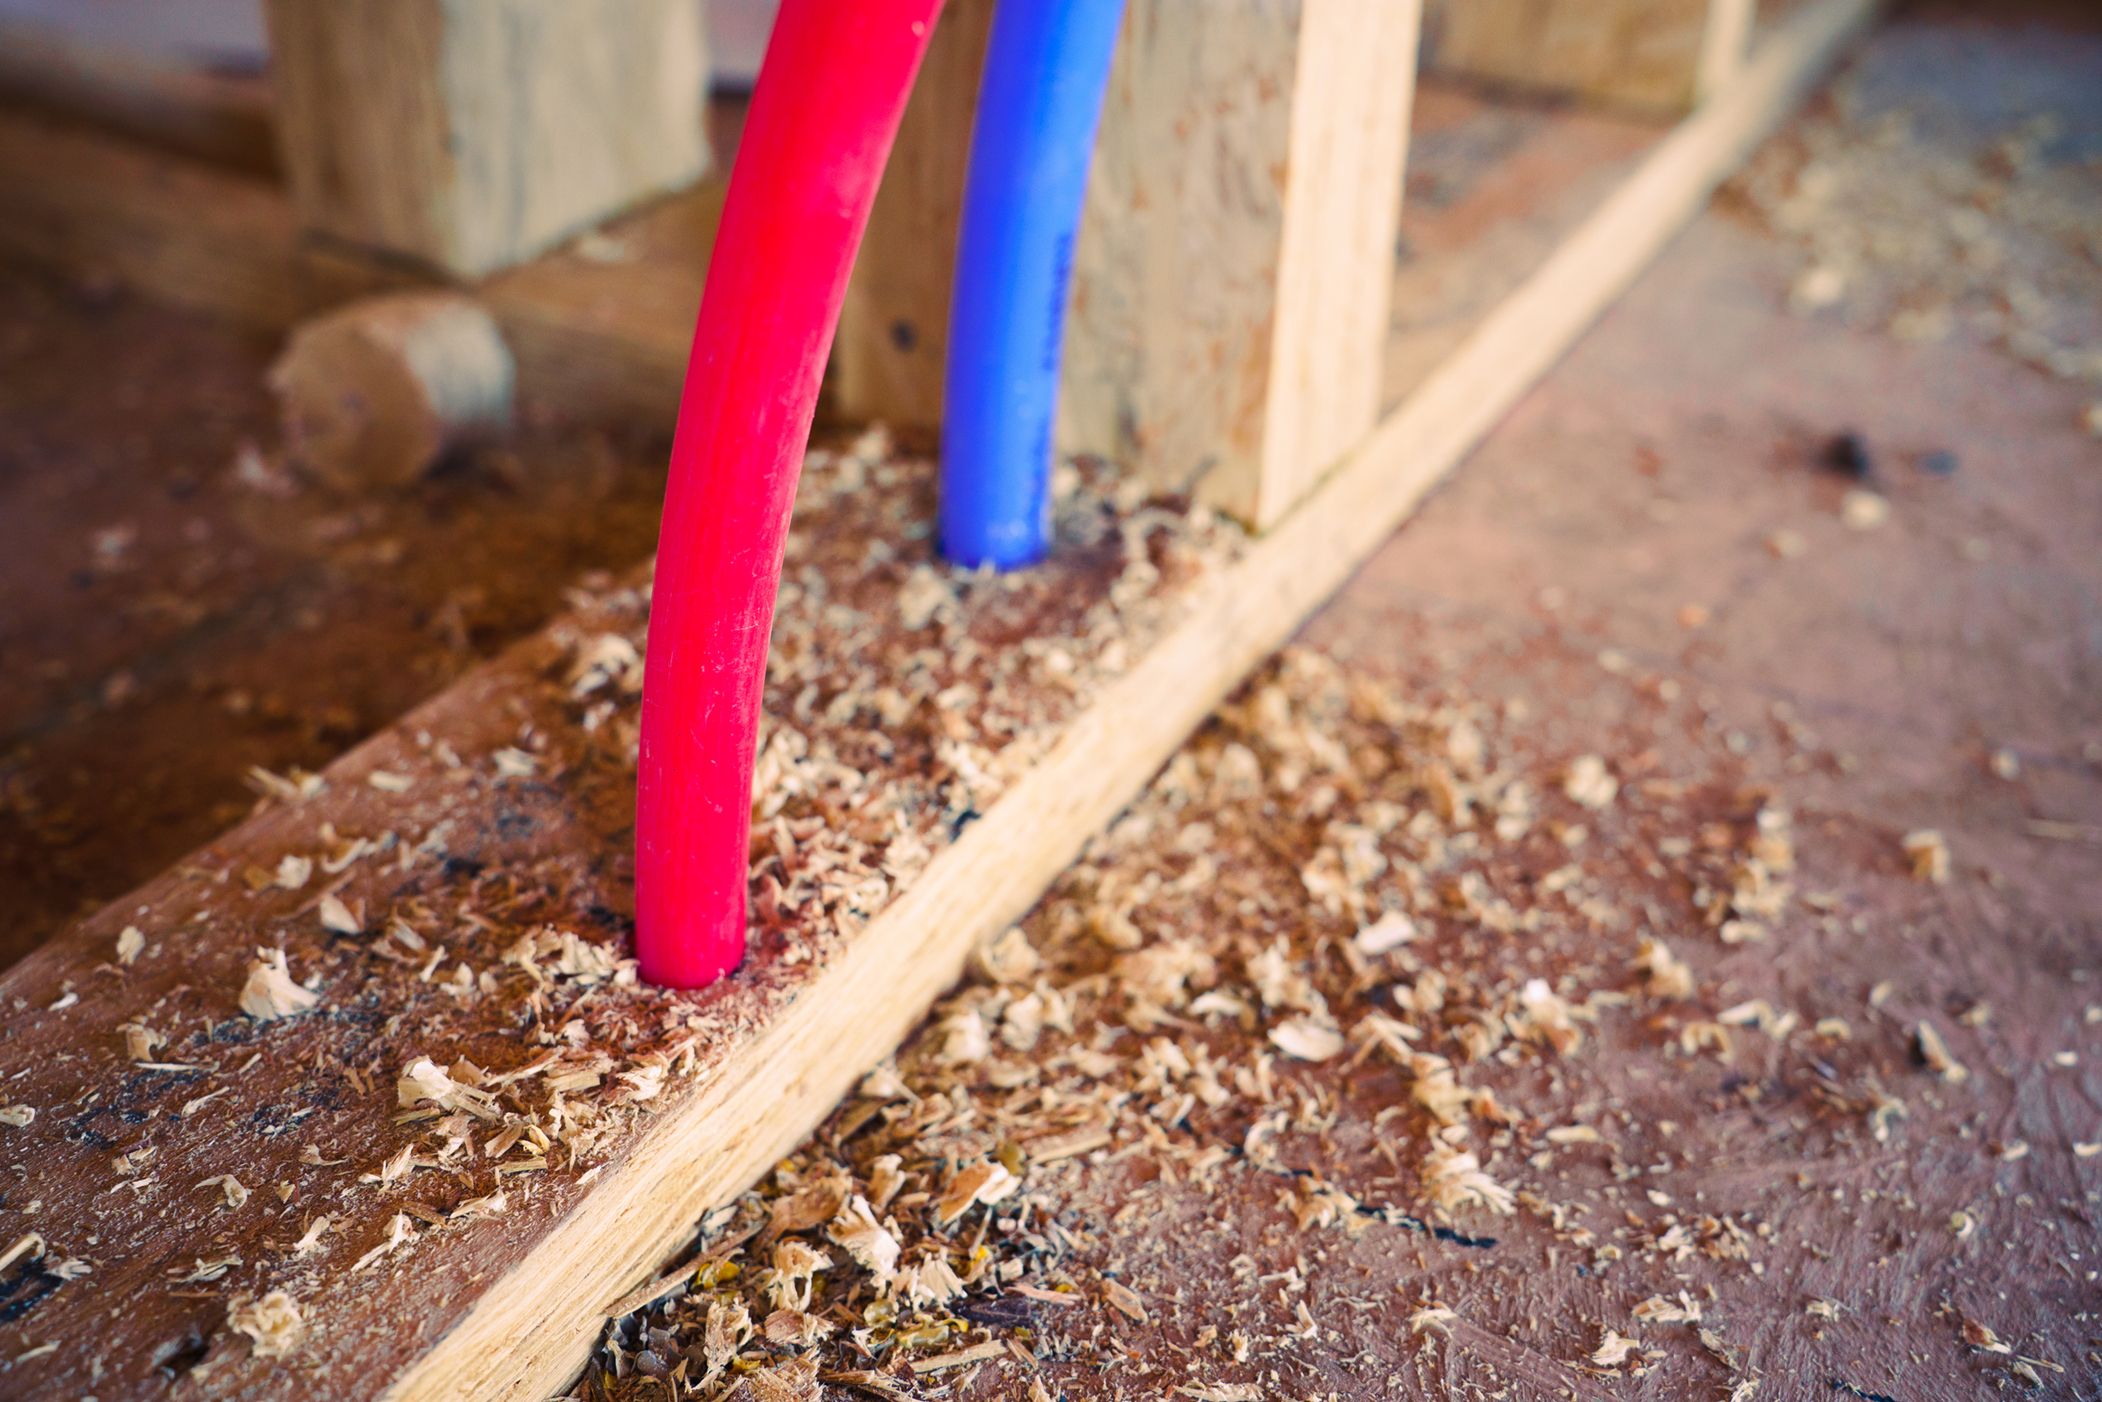 Roughed-in PEX piping